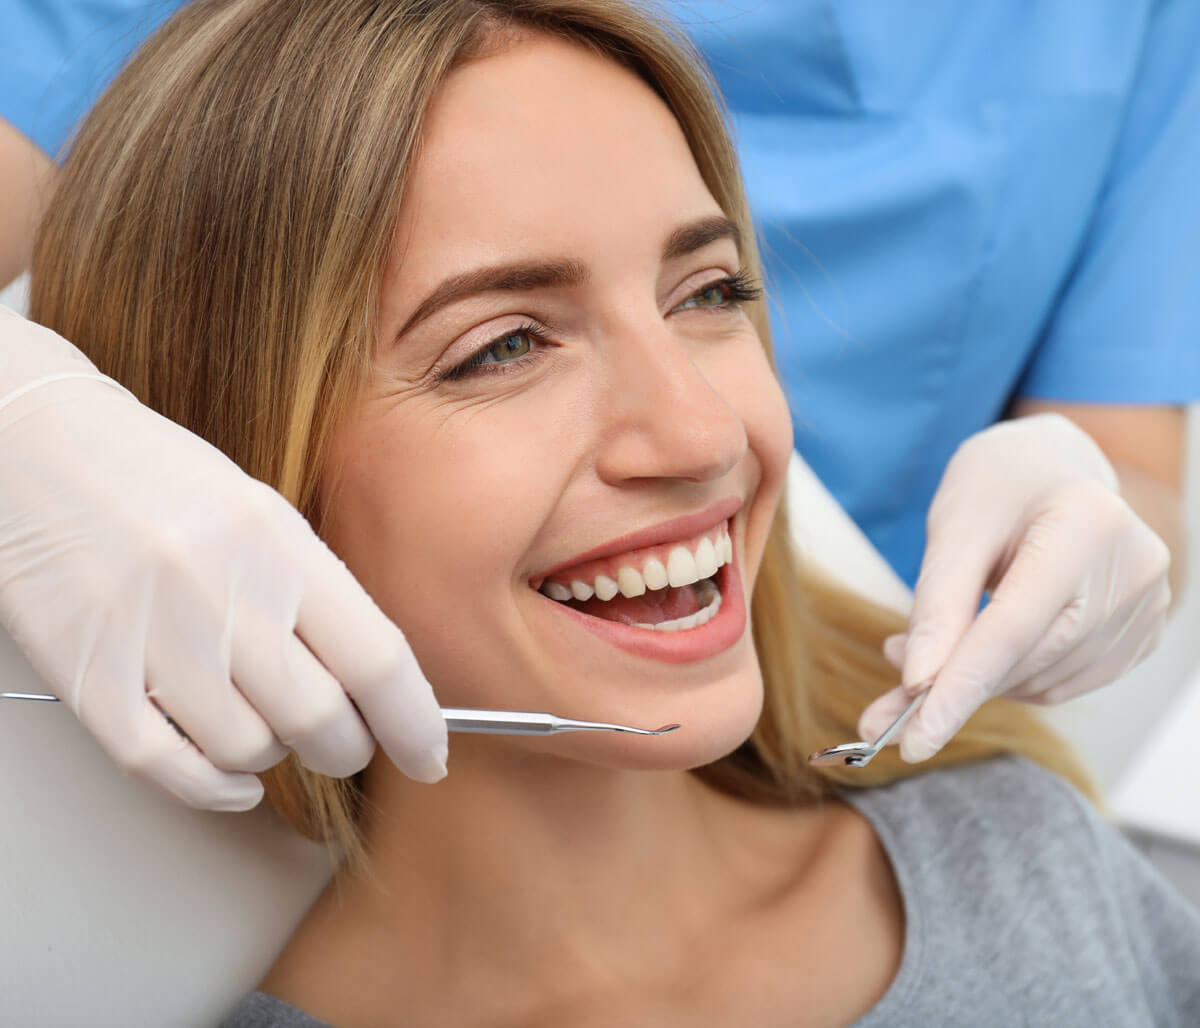 A cosmetic dental makeover with your dentist in Bloomington, IL is all about you